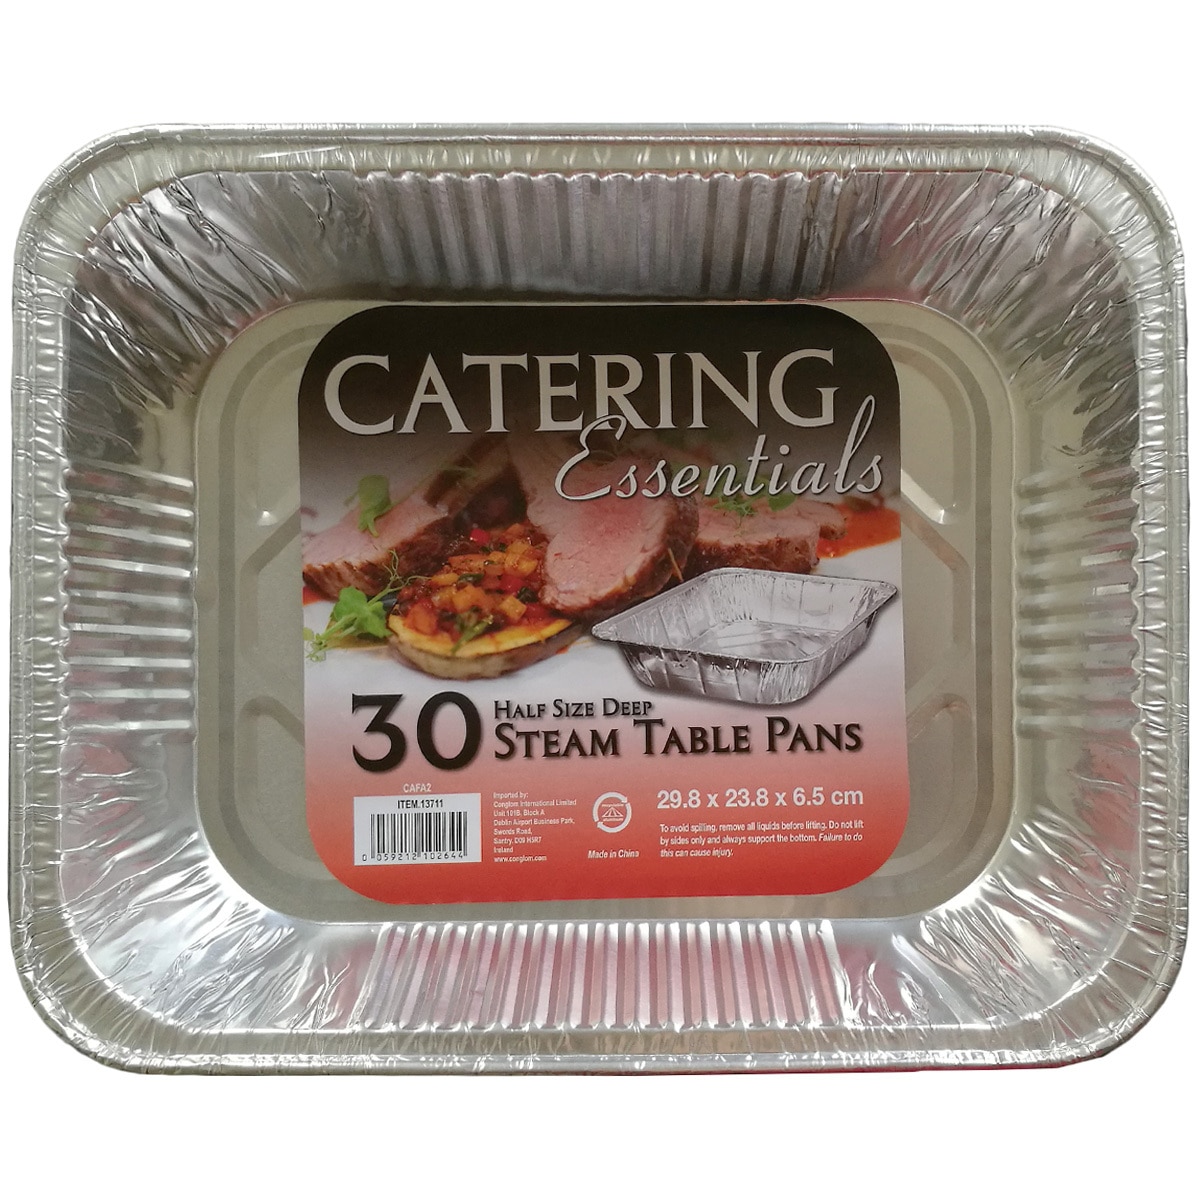 Catering Essentials Steam Table Pans 30 pack